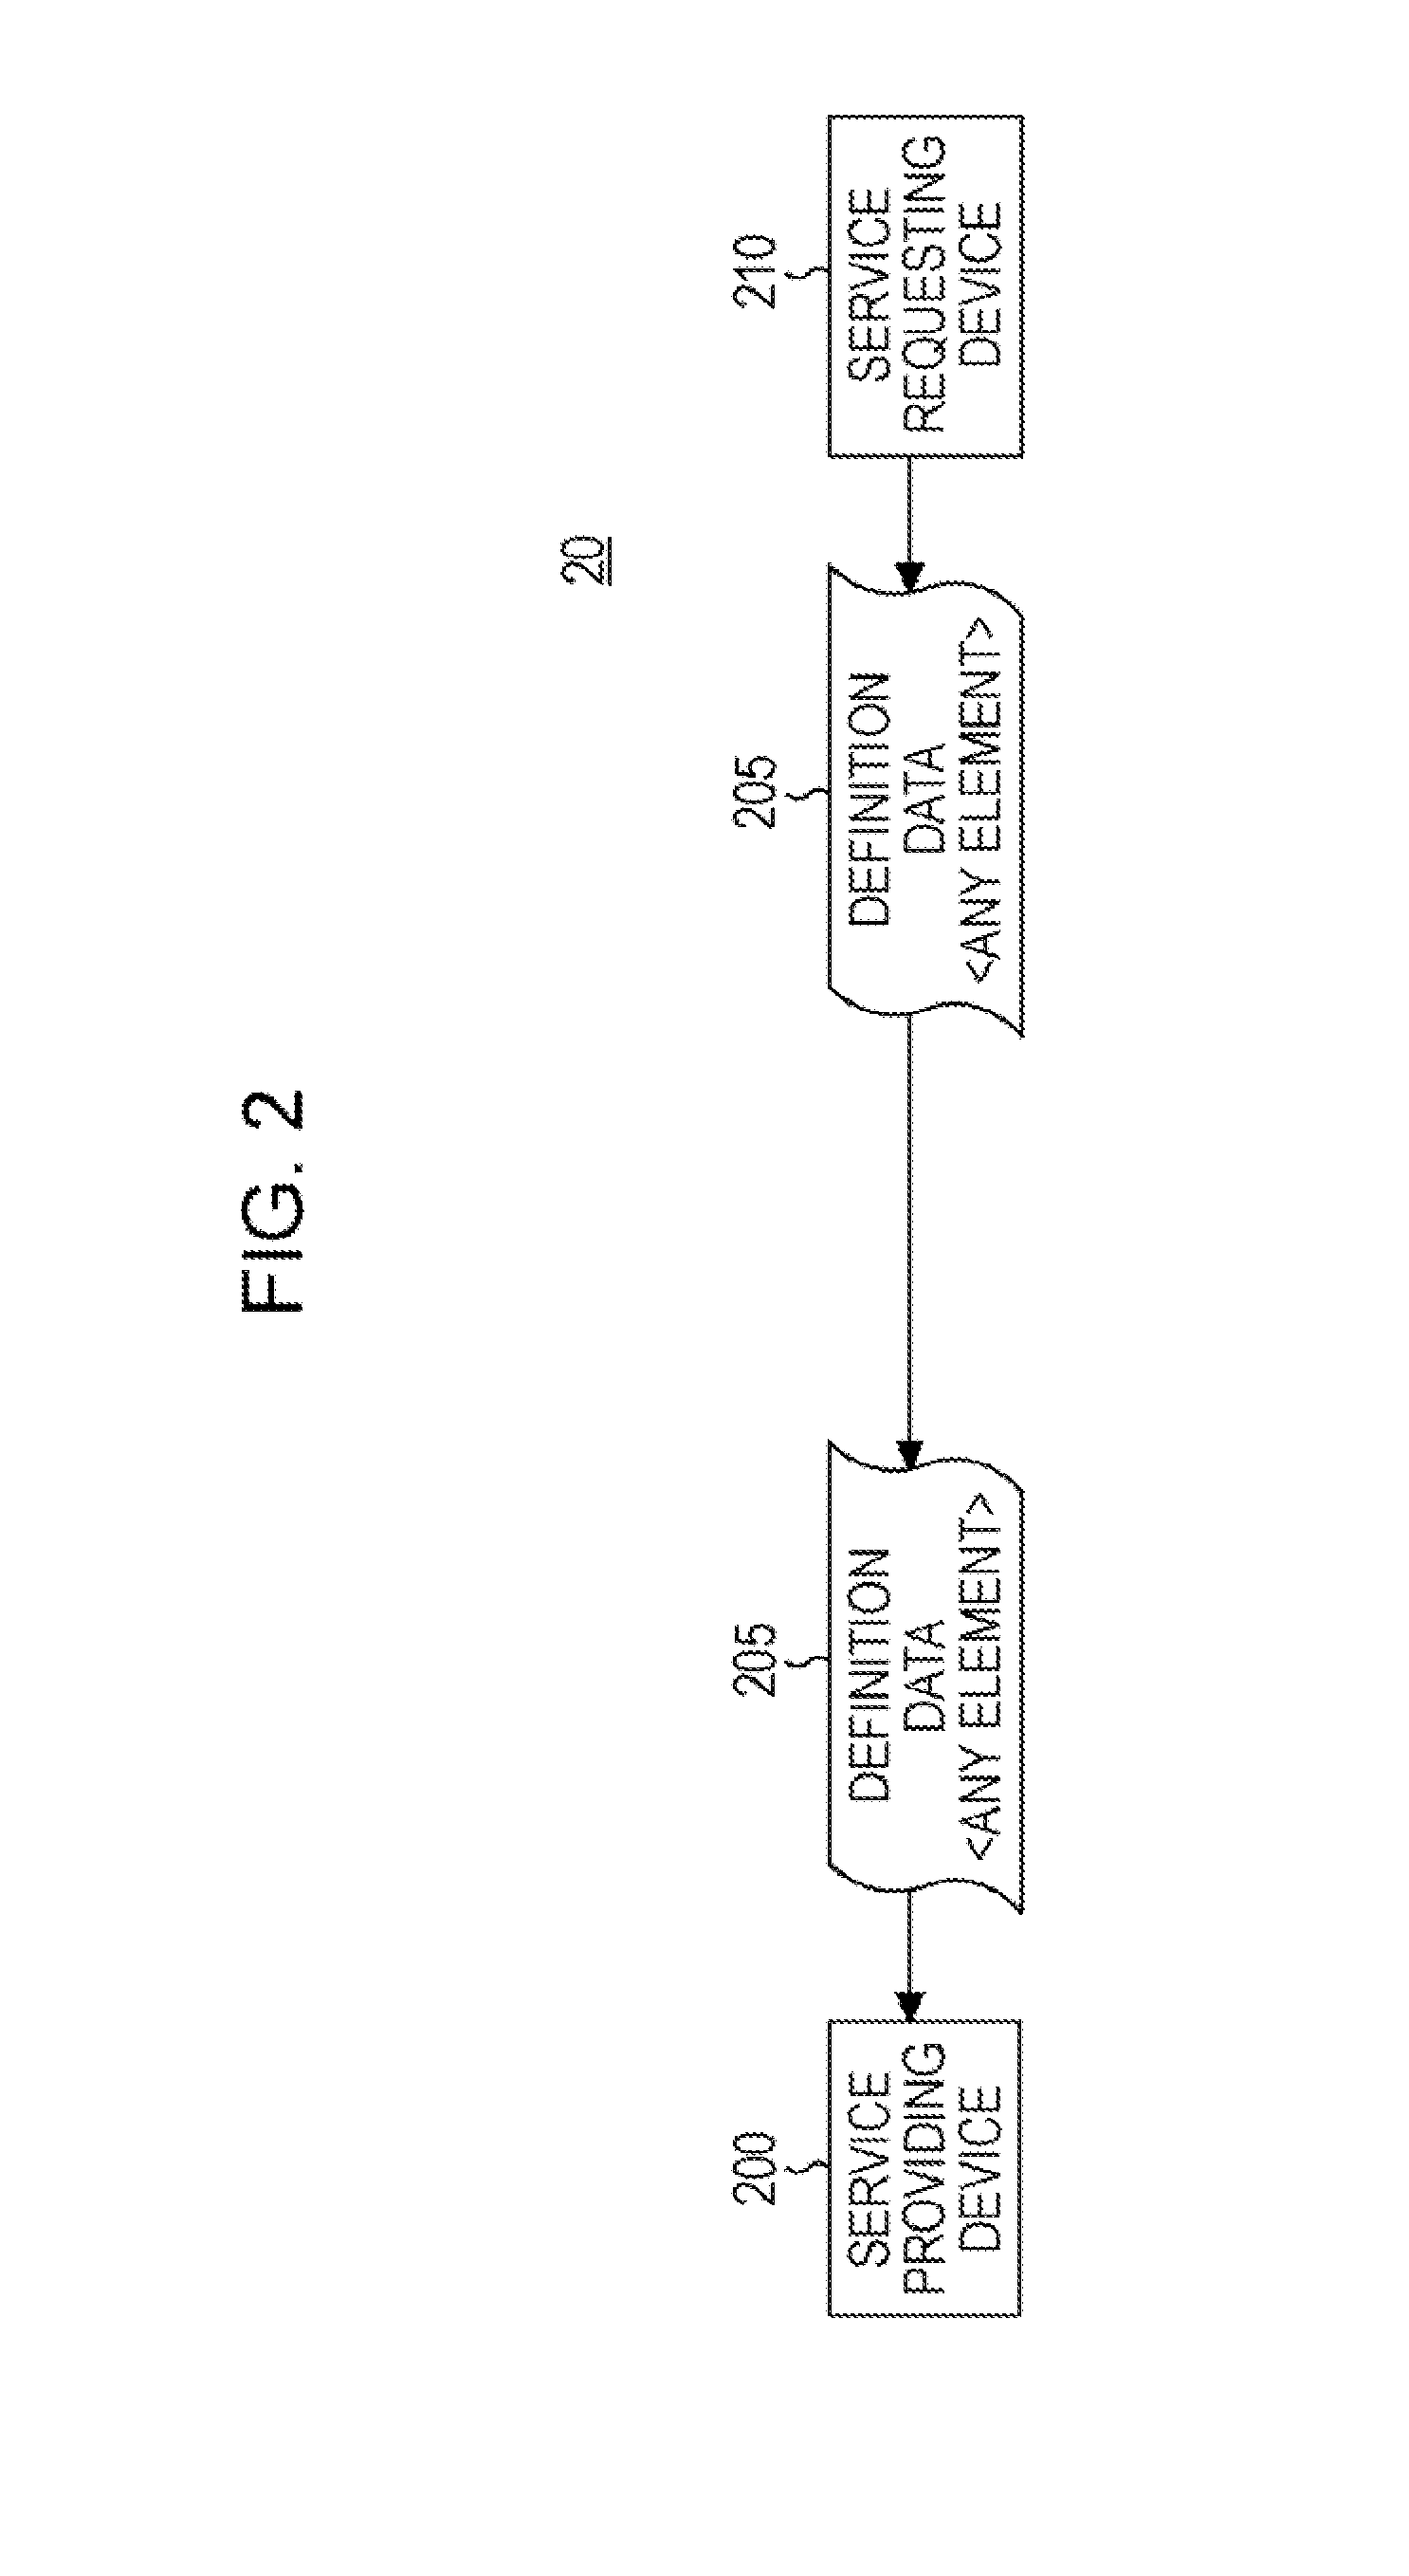 Associating a set of related web services having different input data structures with a common identification name